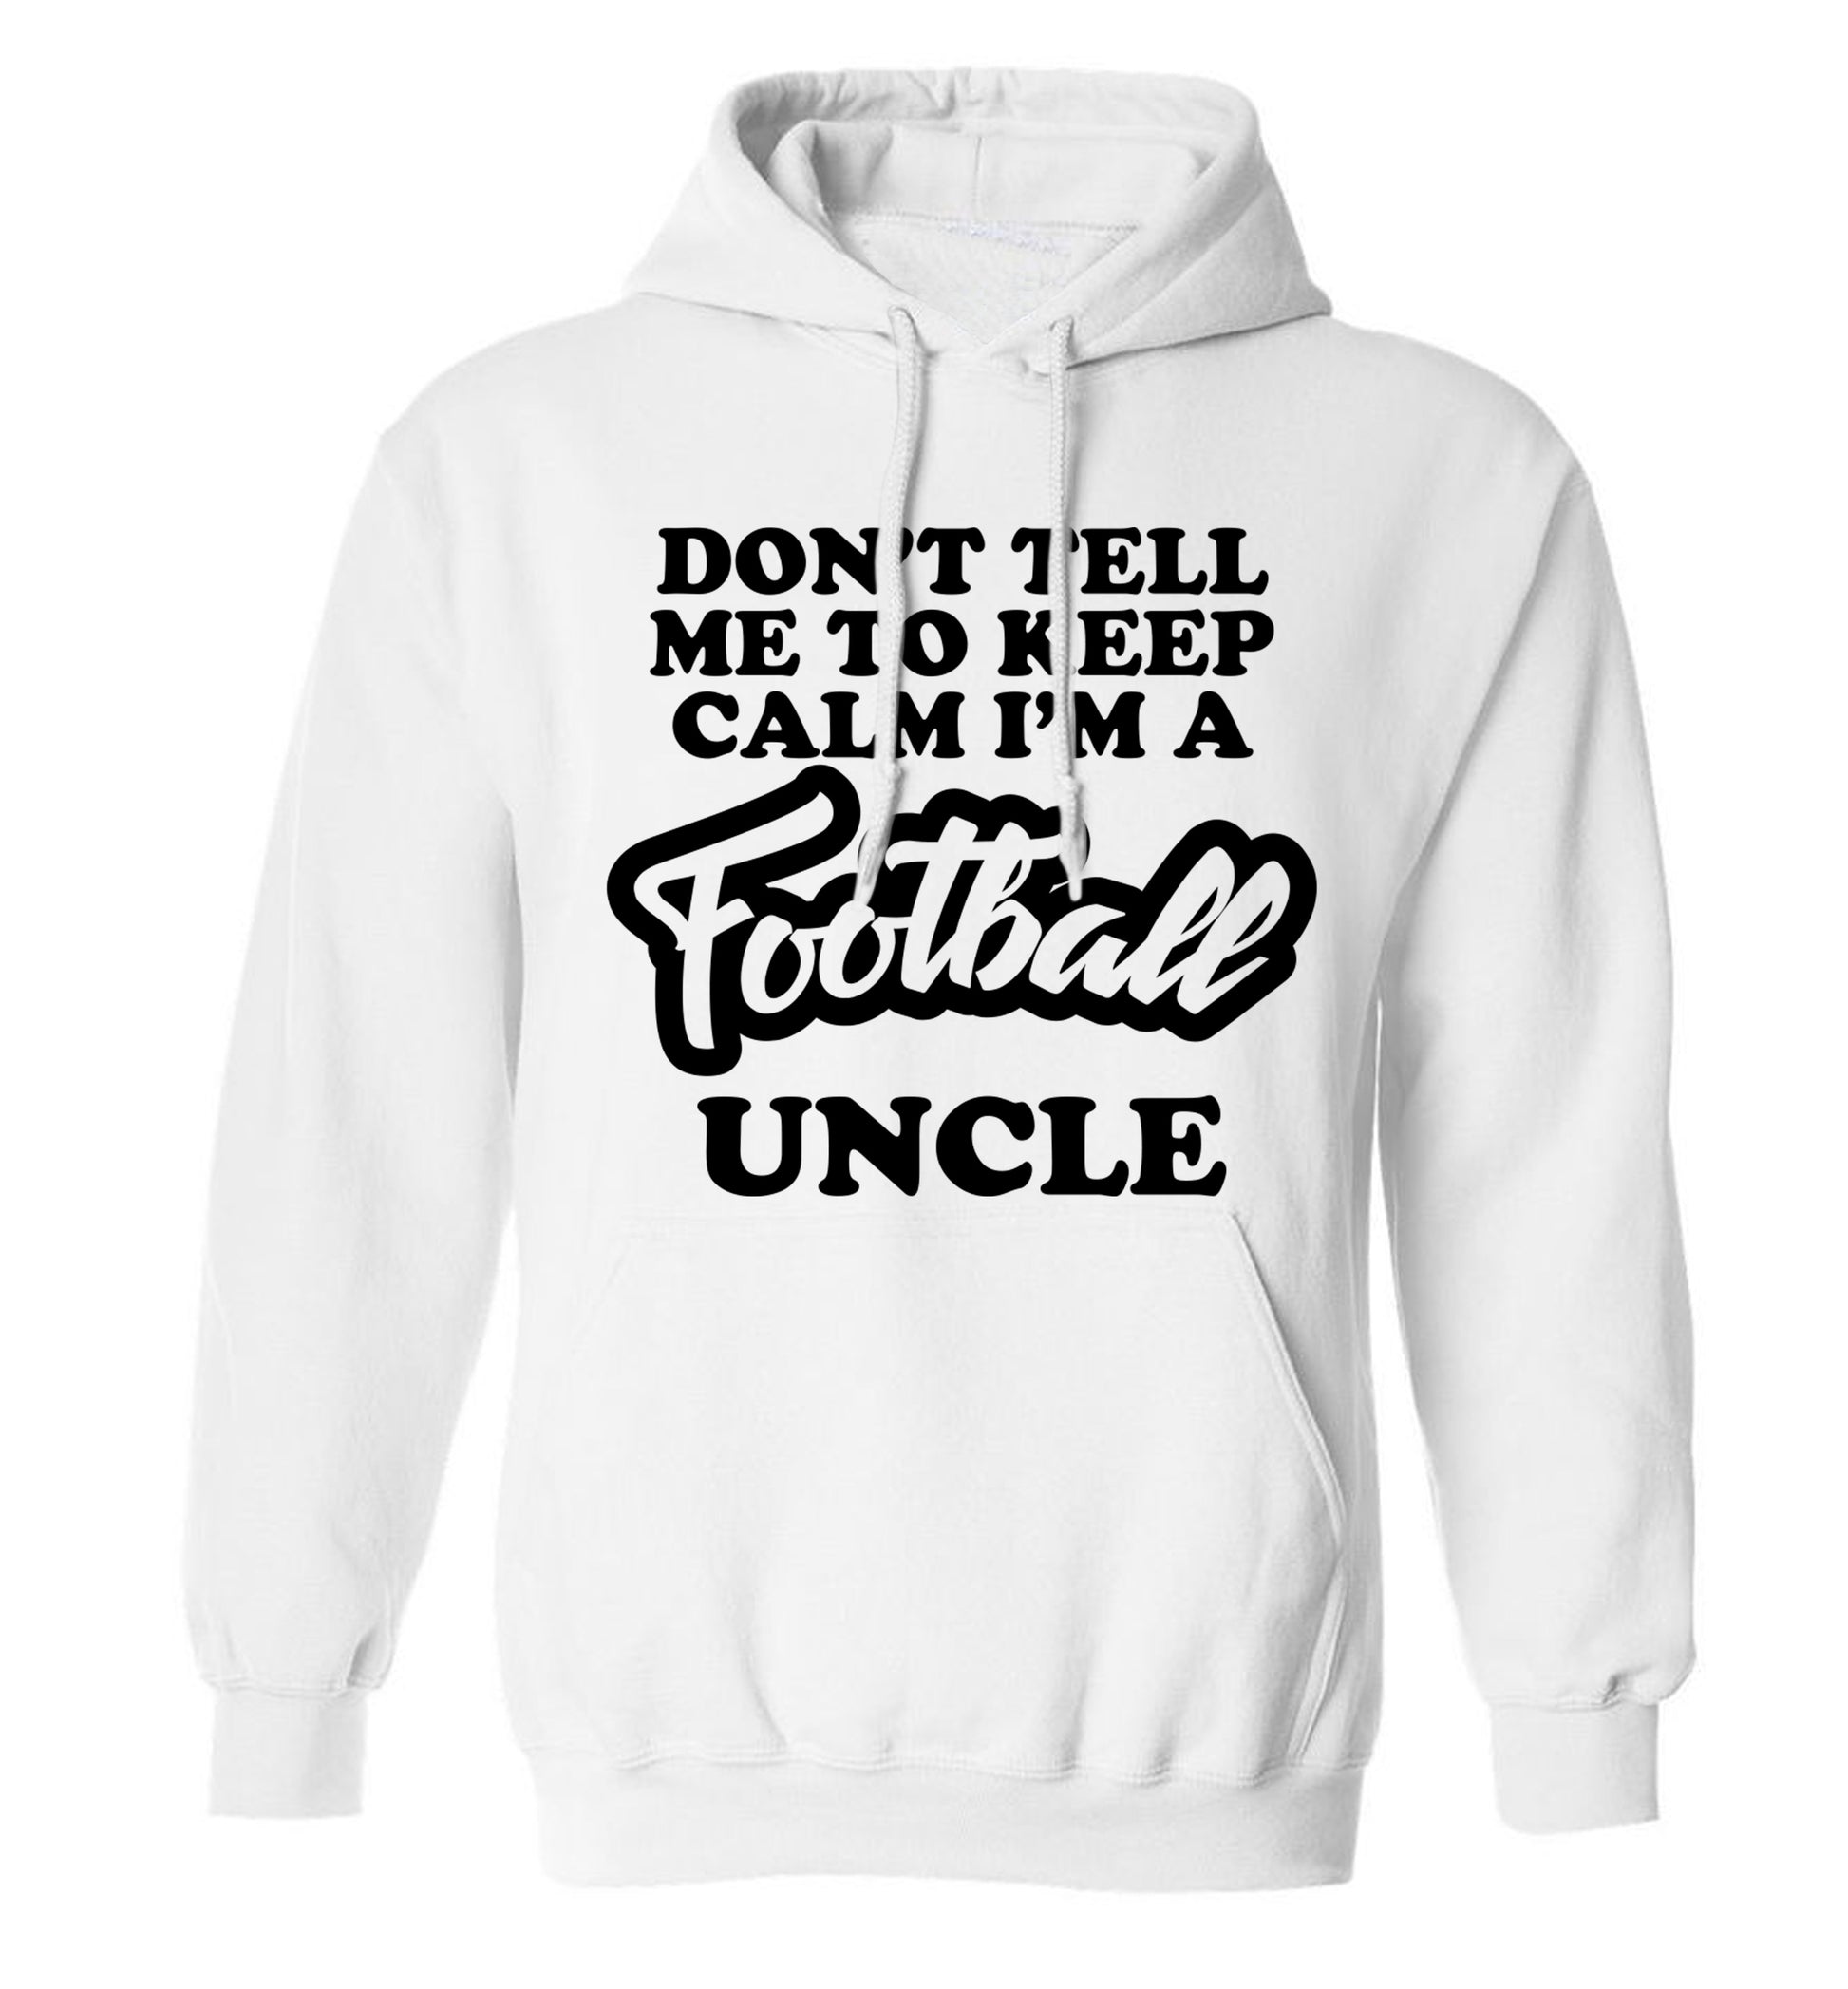 Worlds most amazing football uncle adults unisexwhite hoodie 2XL